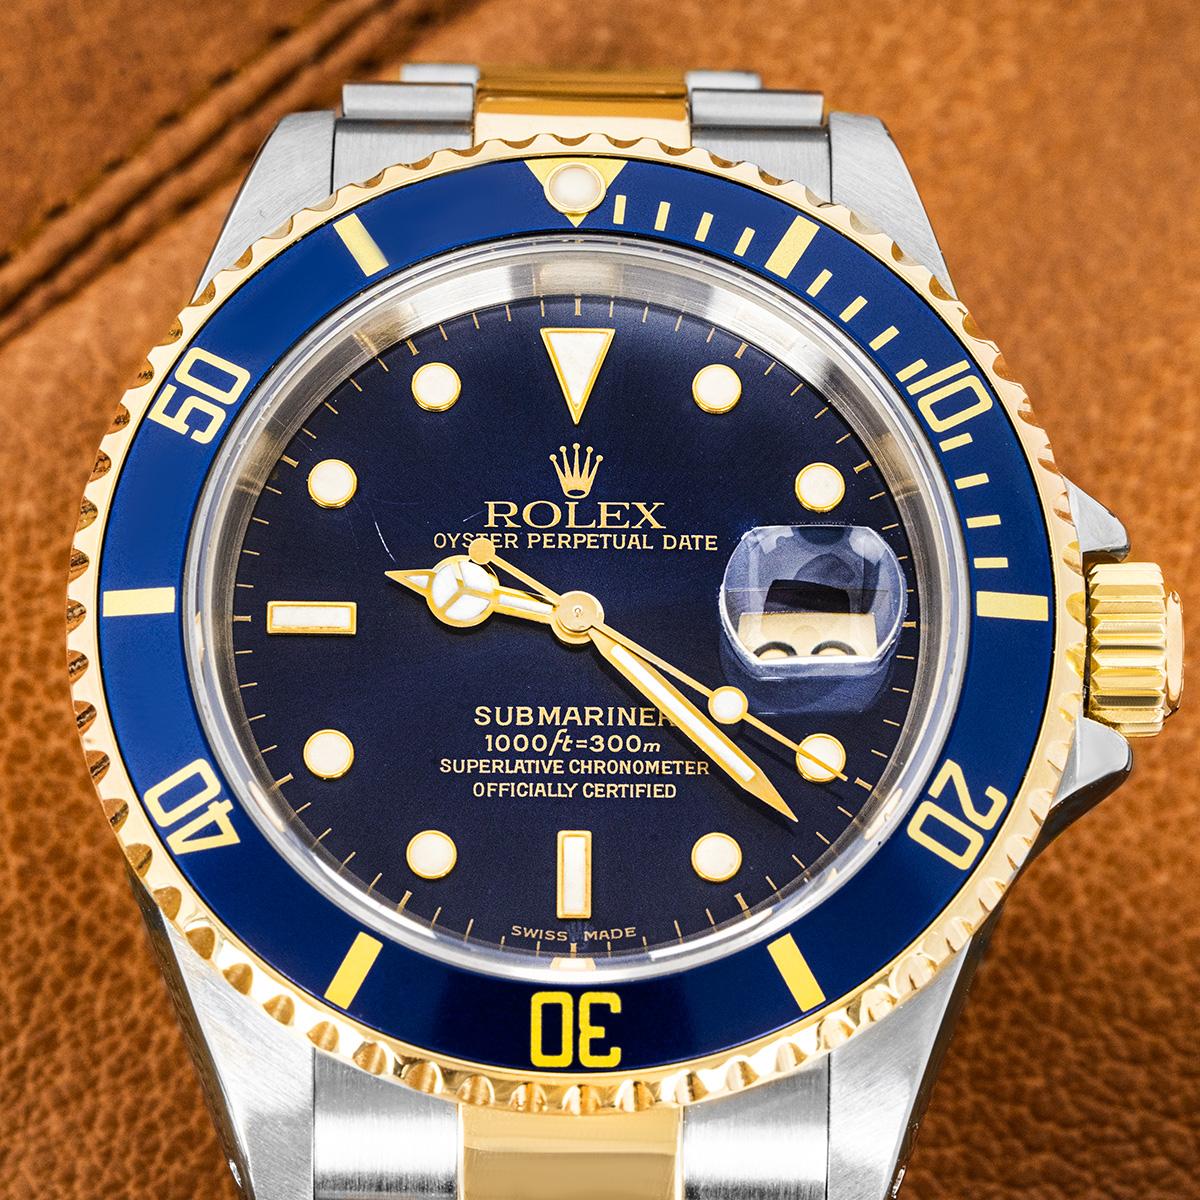 A mens 40mm steel and gold Submariner Date by Rolex. Features a blue dial with applied hour markers, a yellow gold uni-directional rotating bezel and a blue bezel insert. Fitted with a sapphire glass, a self-winding automatic movement and a